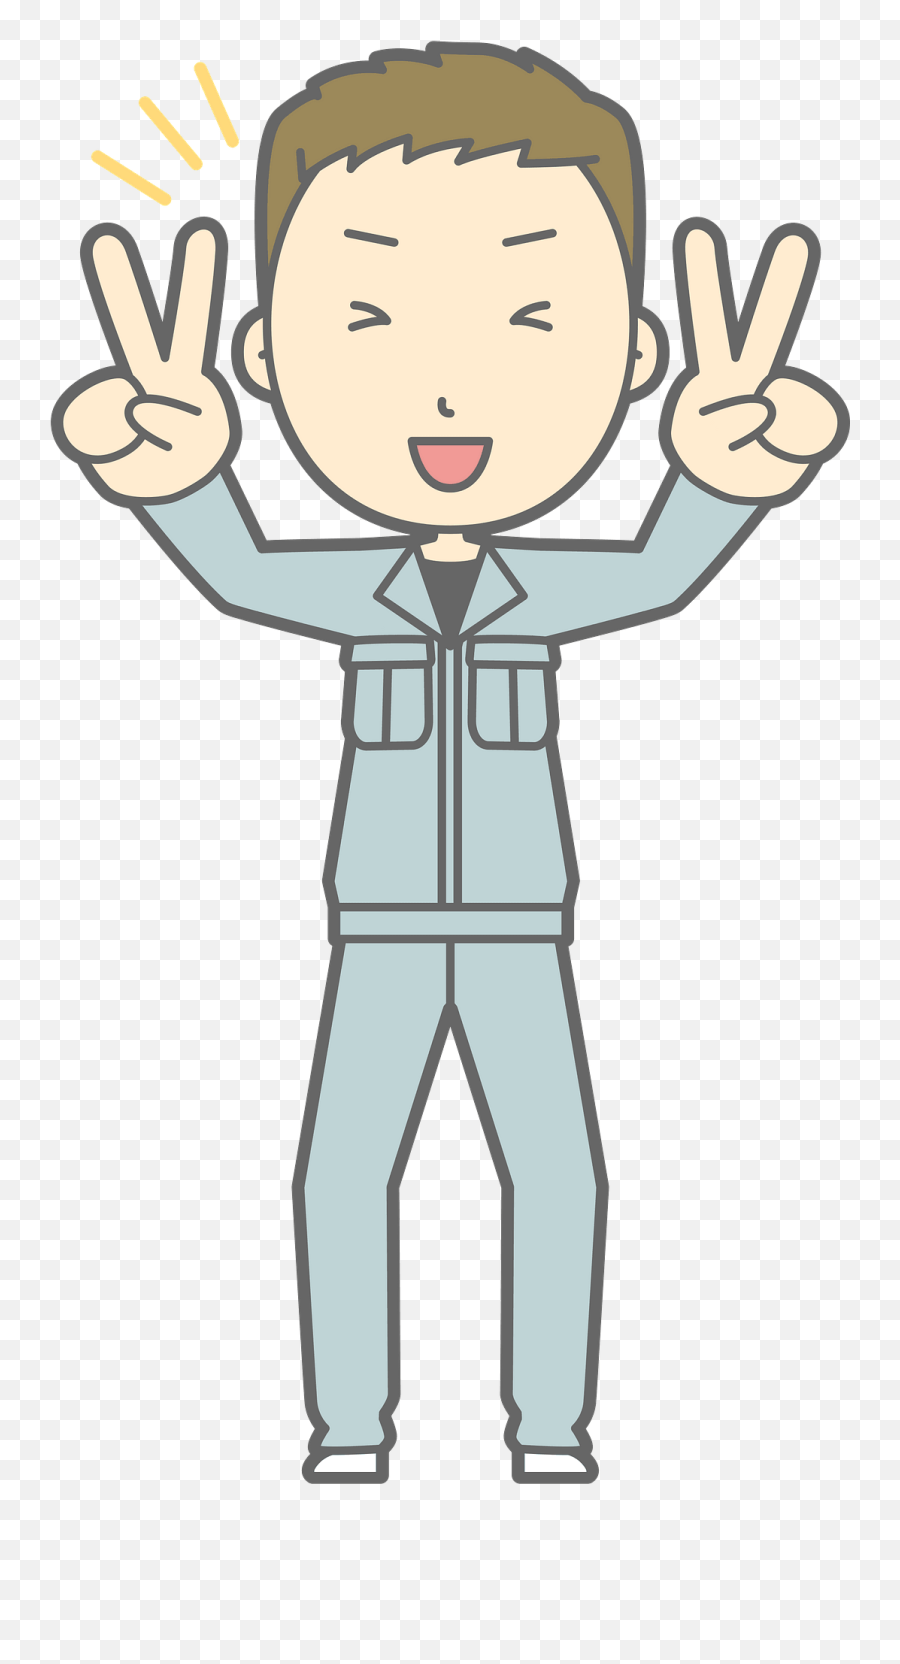 Leo Man Worker Is Giving V Sign Clipart Free Download - Man Thumbs Up Clipart Emoji,V Clipart